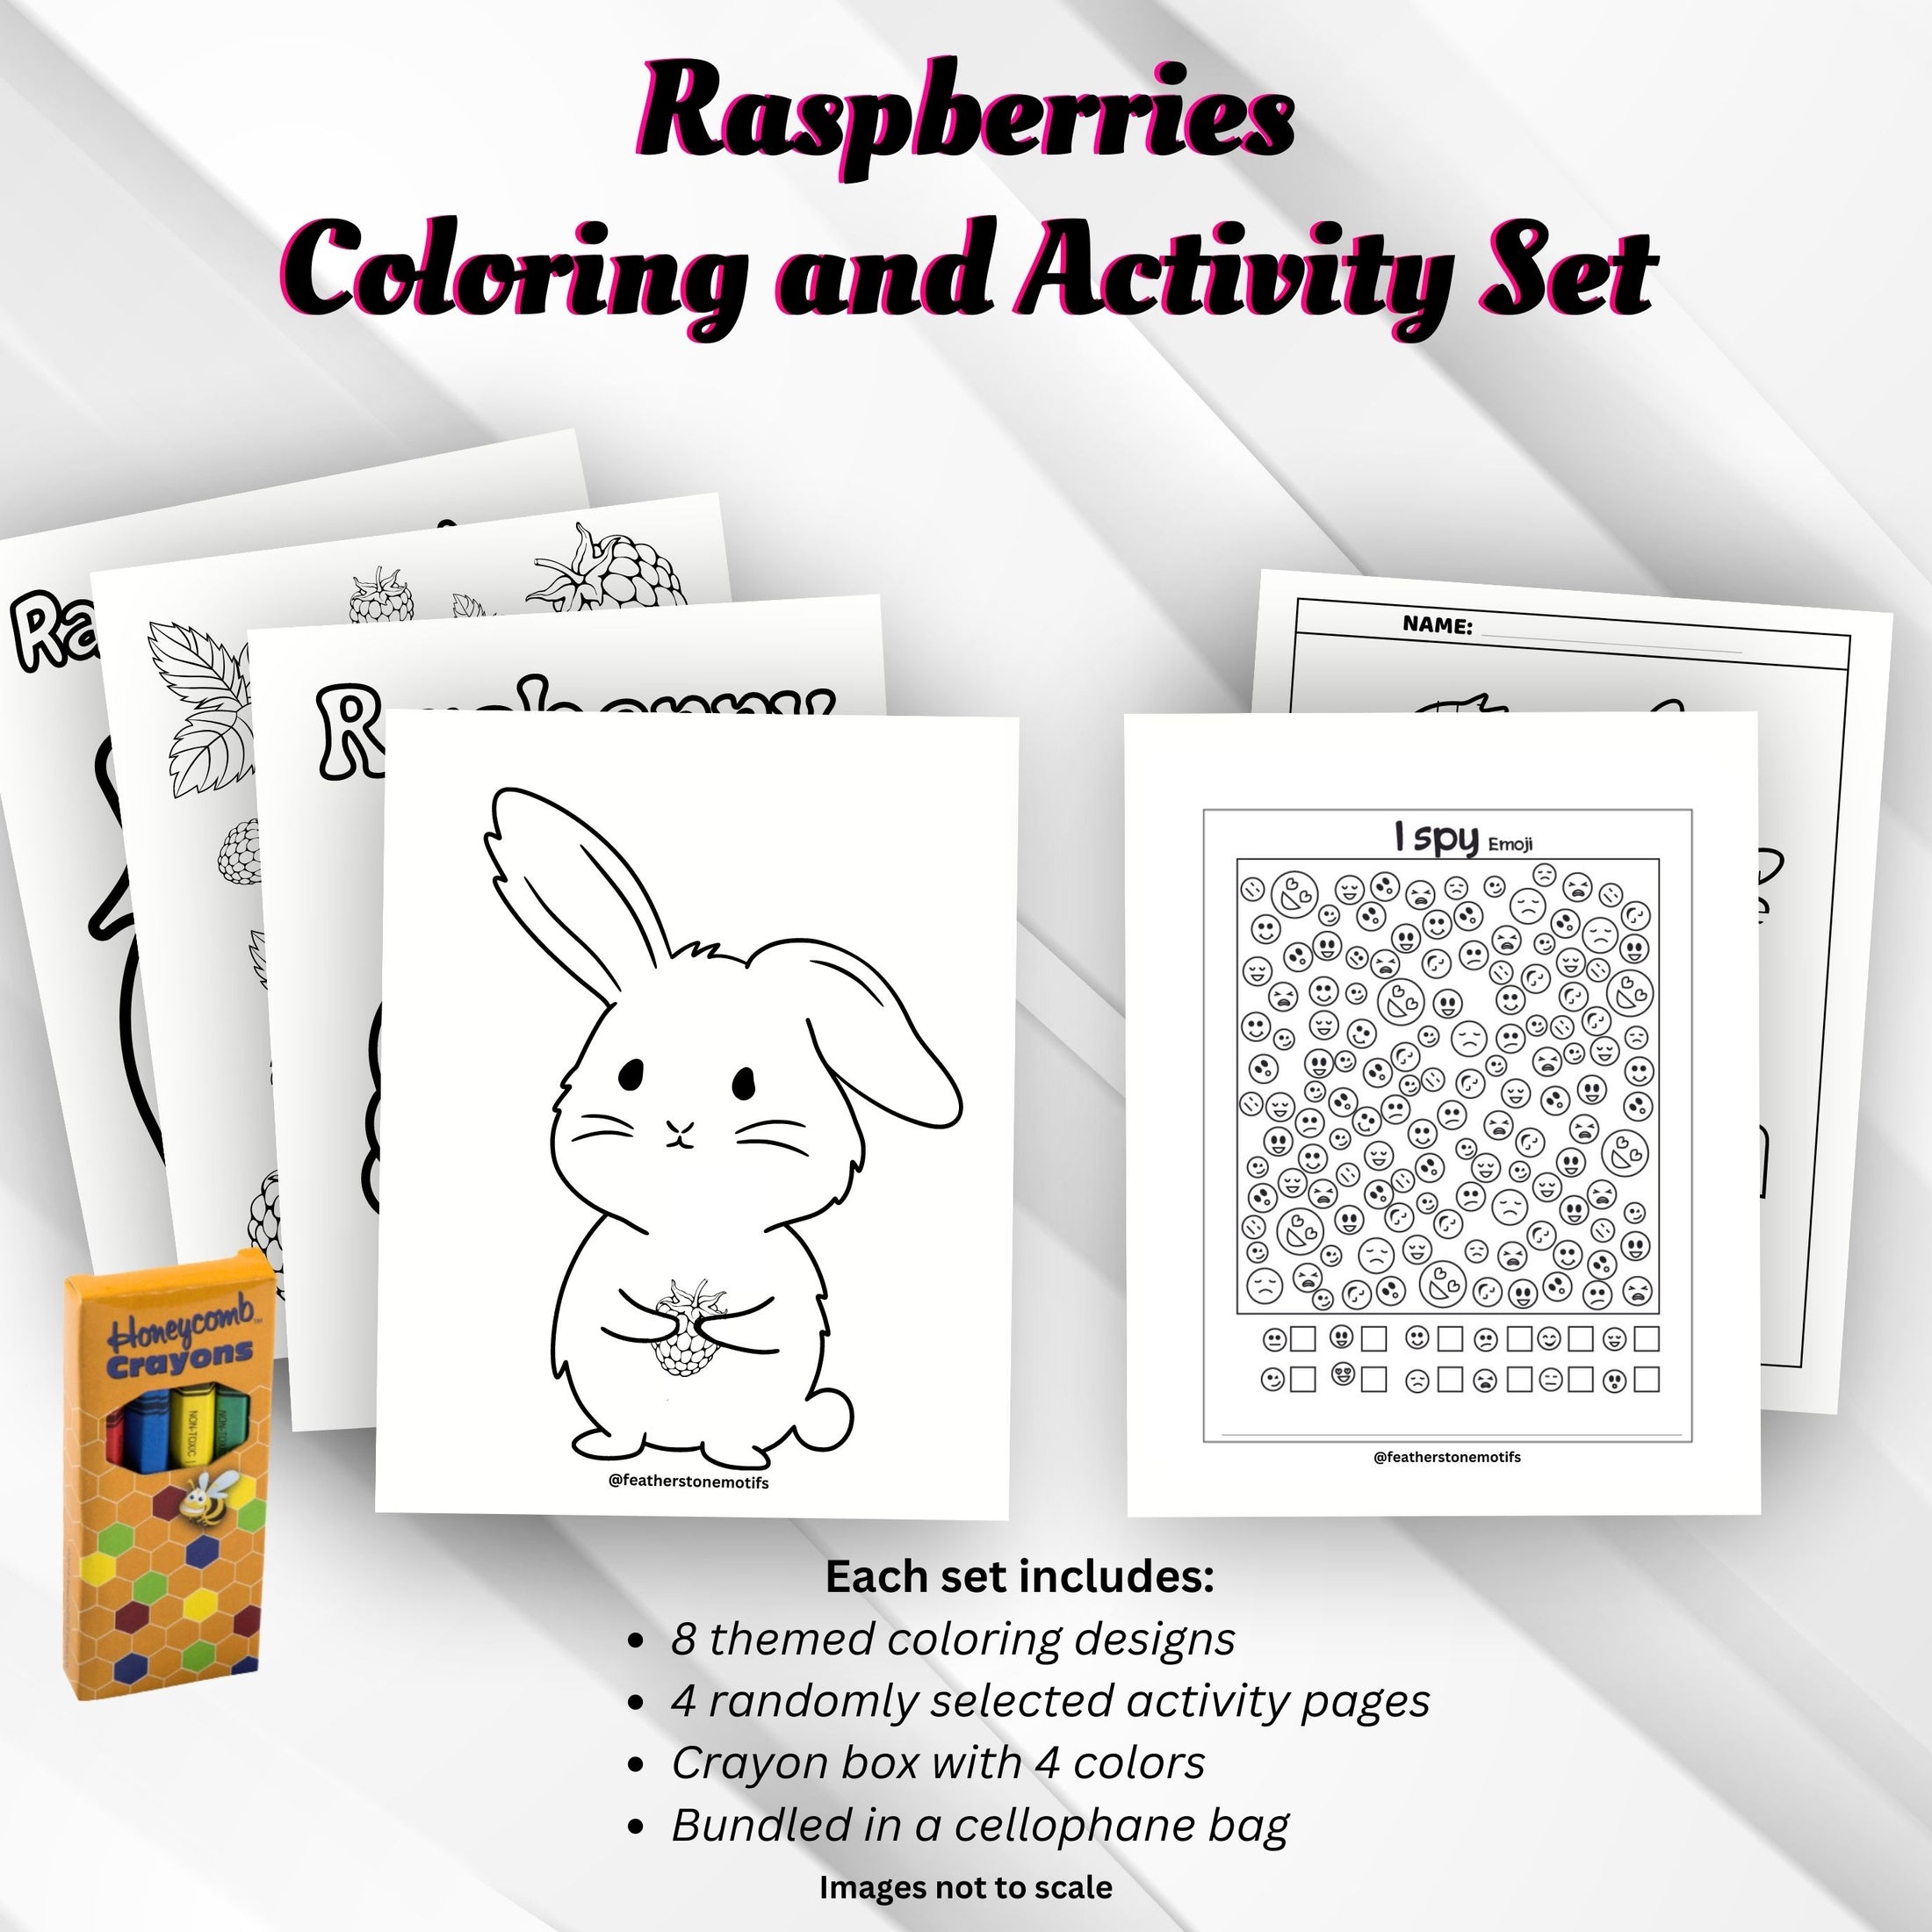 This image shows the Raspberries Coloring and Activity set with coloring pages, activity pages, and crayons.